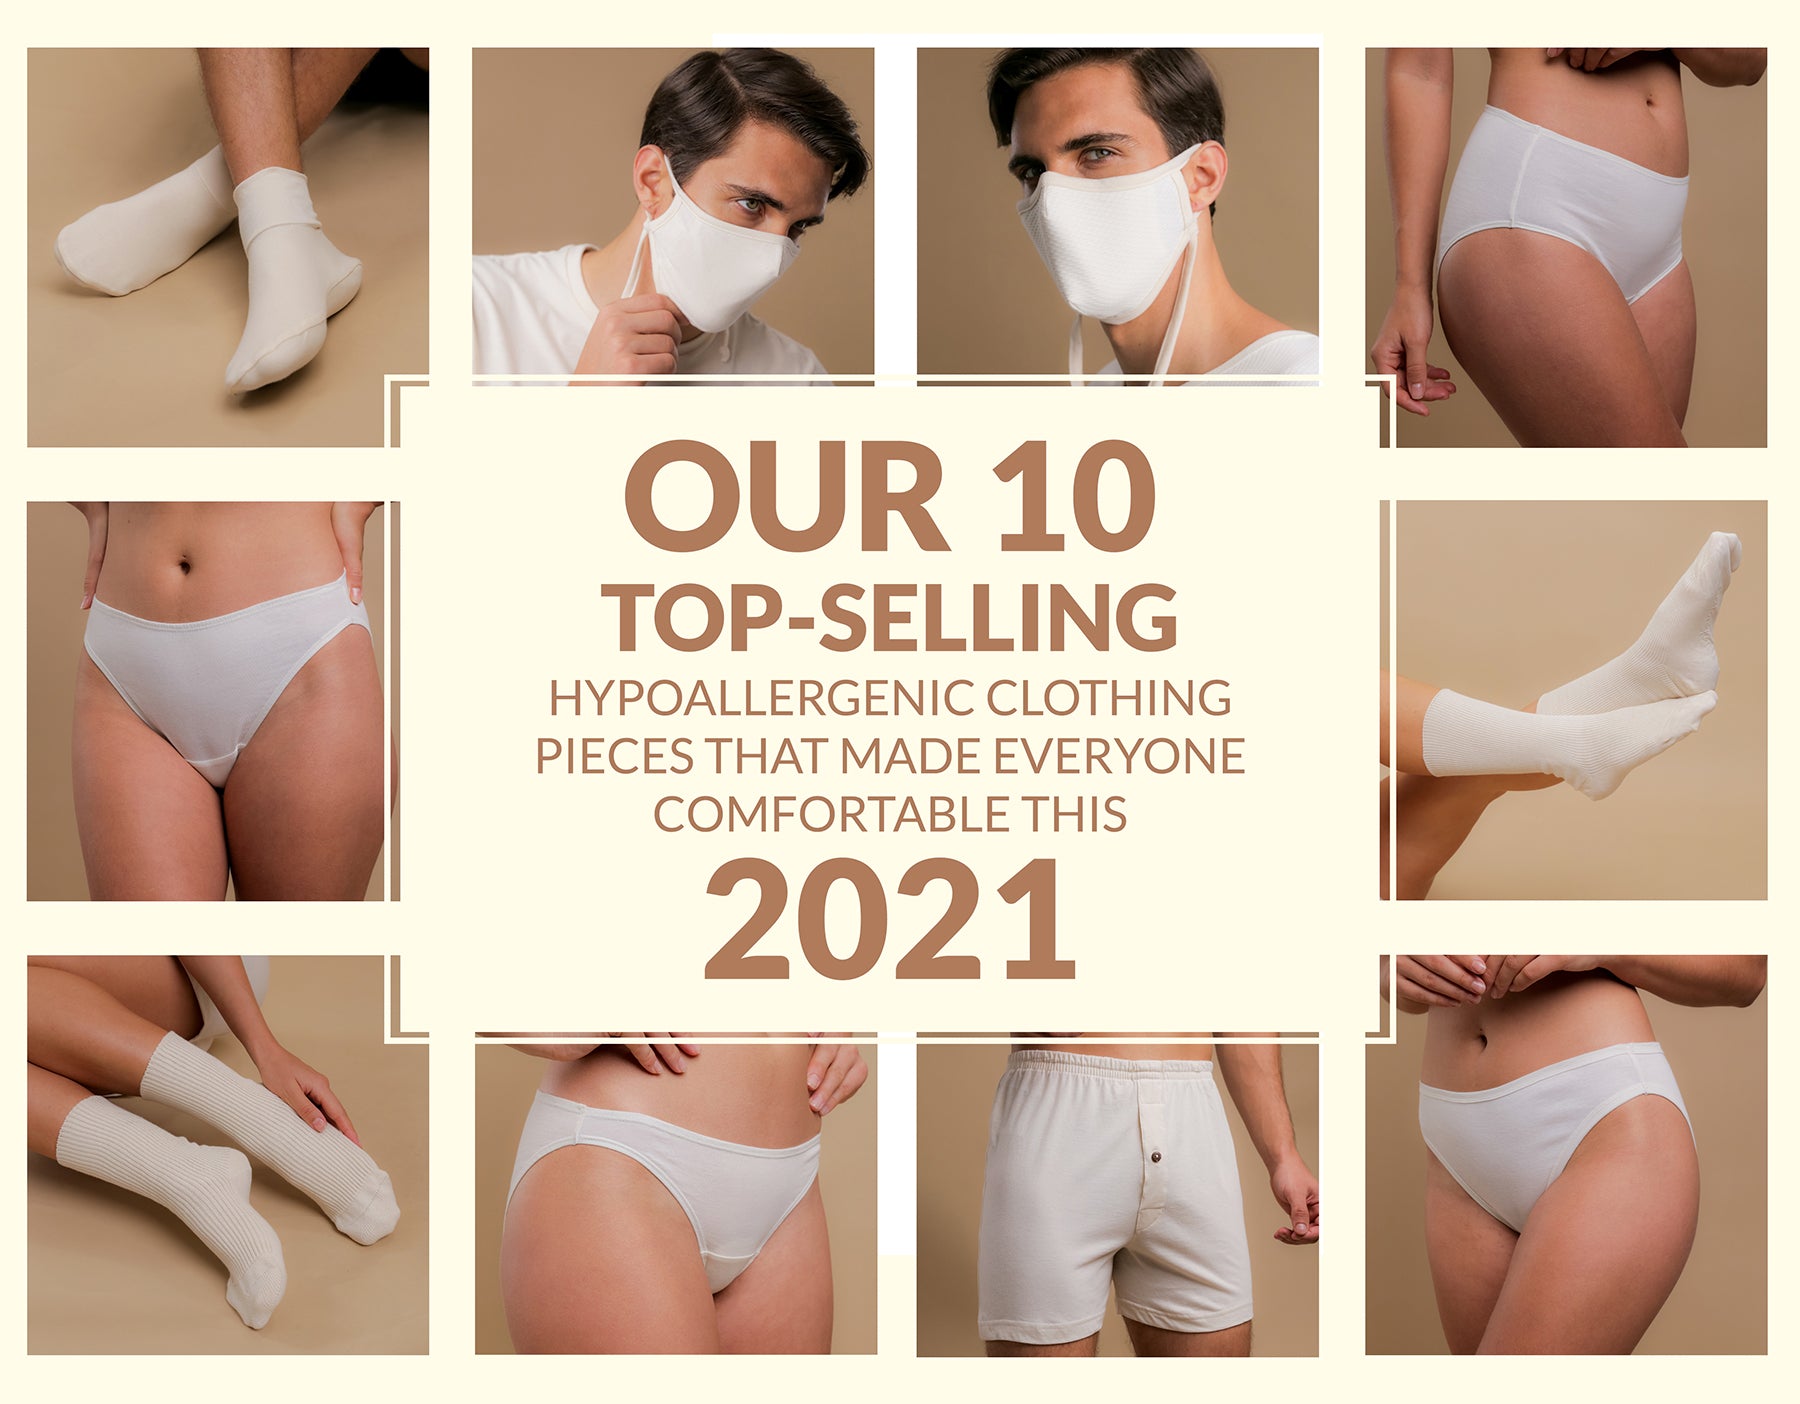 Our 10 Top-Selling Hypoallergenic Clothing Pieces That Made